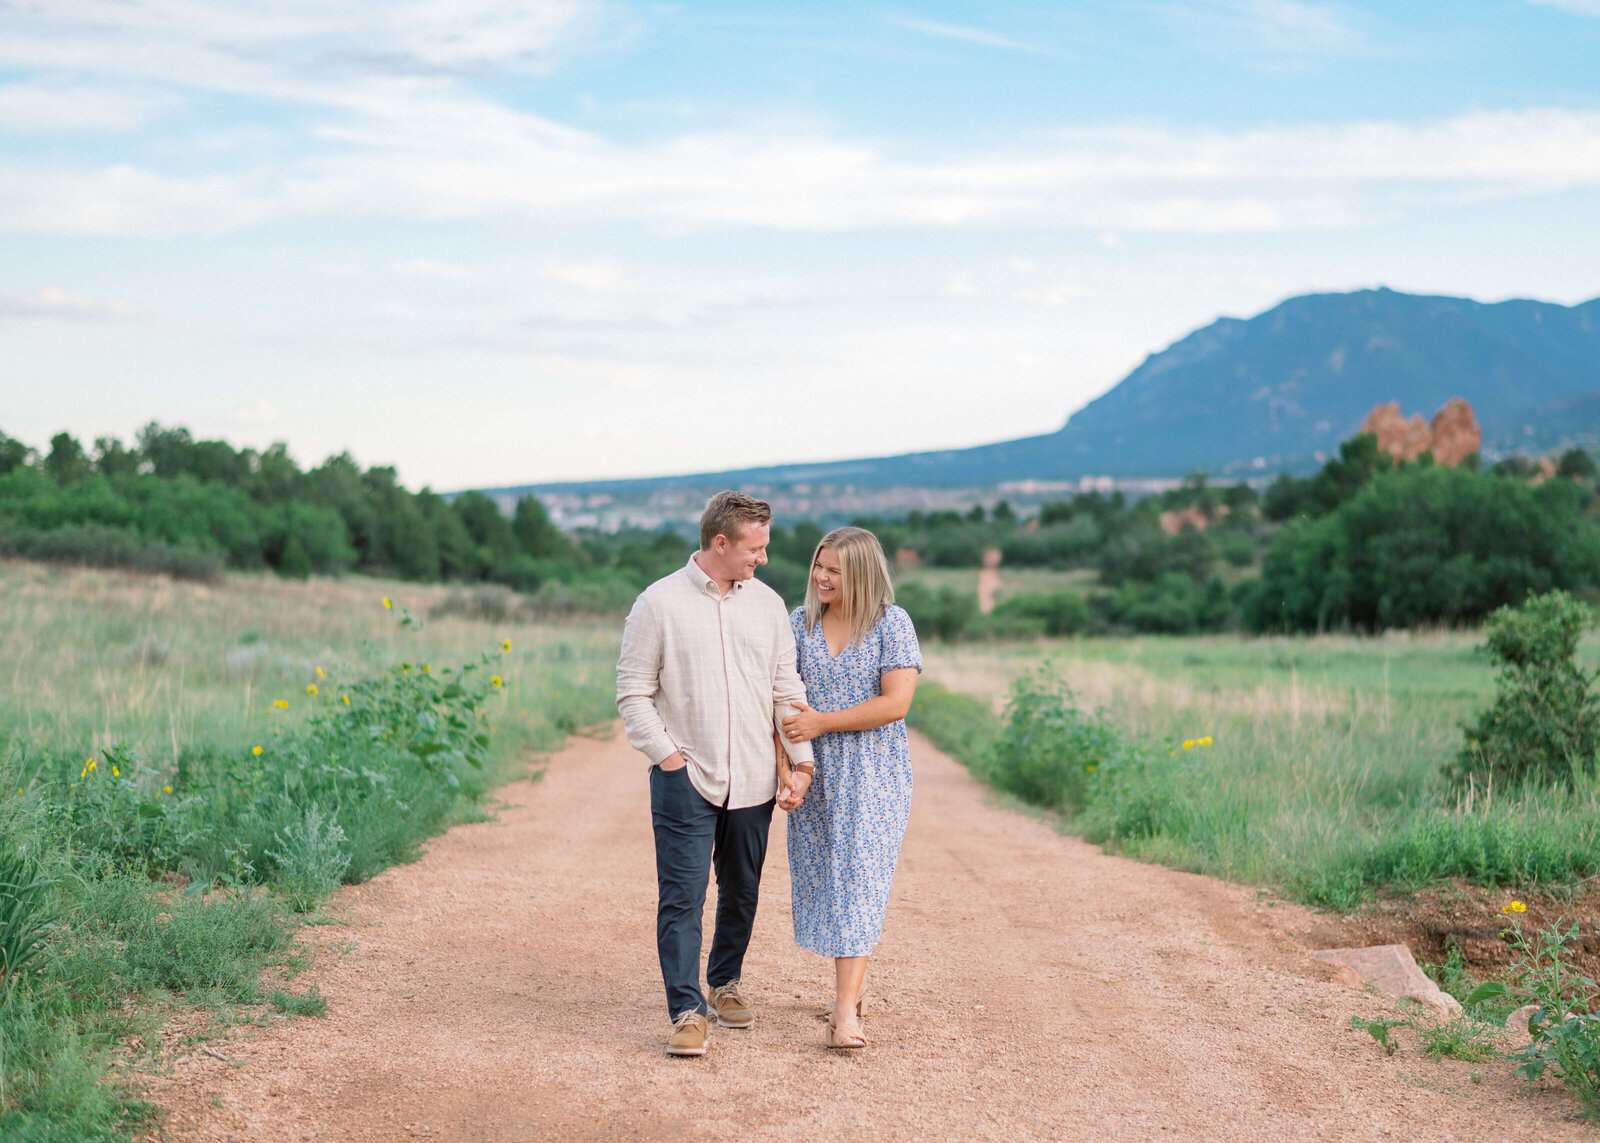 A couple links arms and walks down a dirt path together during their engagement session with virginia wedding photographer